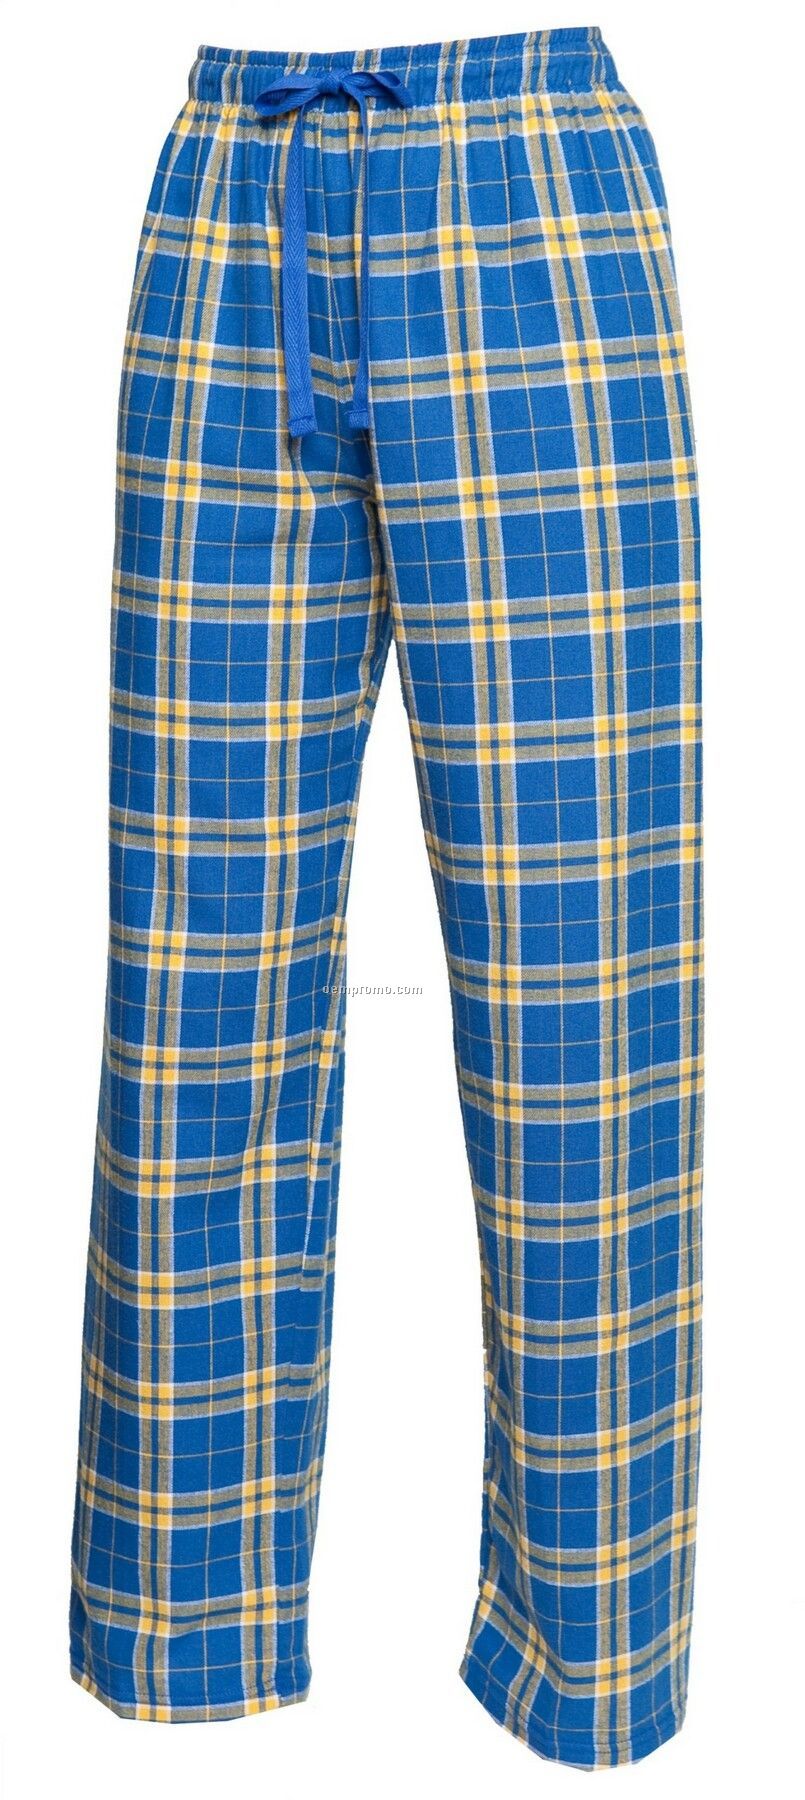 Adult Team Pride Flannel Pant In Royal Blue & Gold Plaid